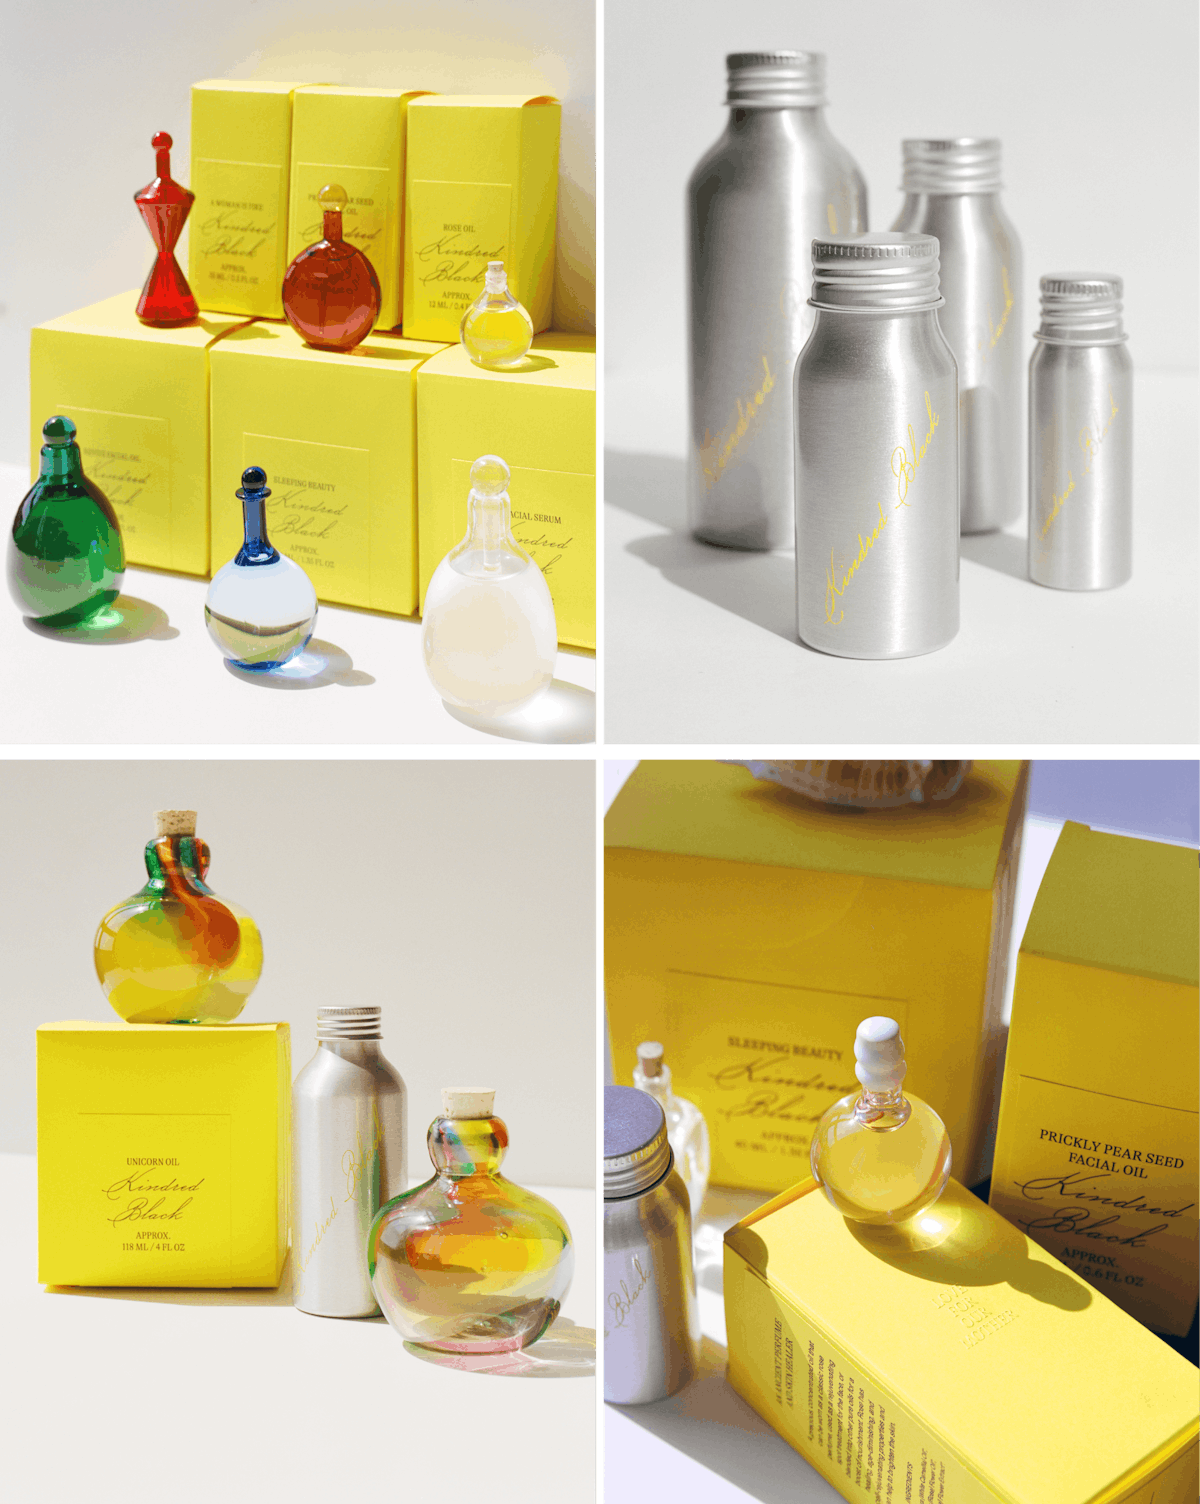 DO NOT throw away your fragrance bottles! Our fragrances are refillabl